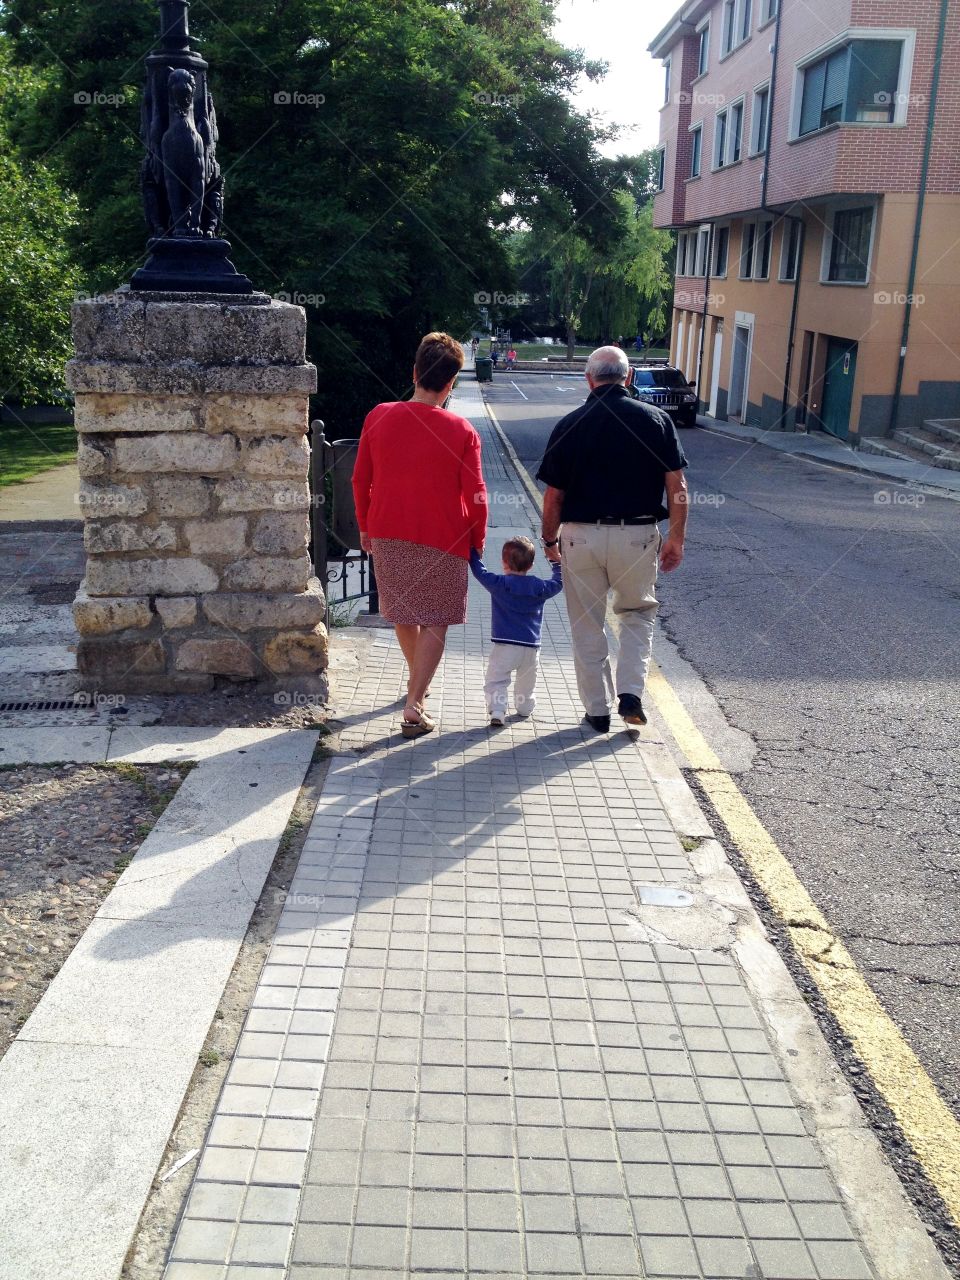 the grandparents walking slowly with the grandson by the hand